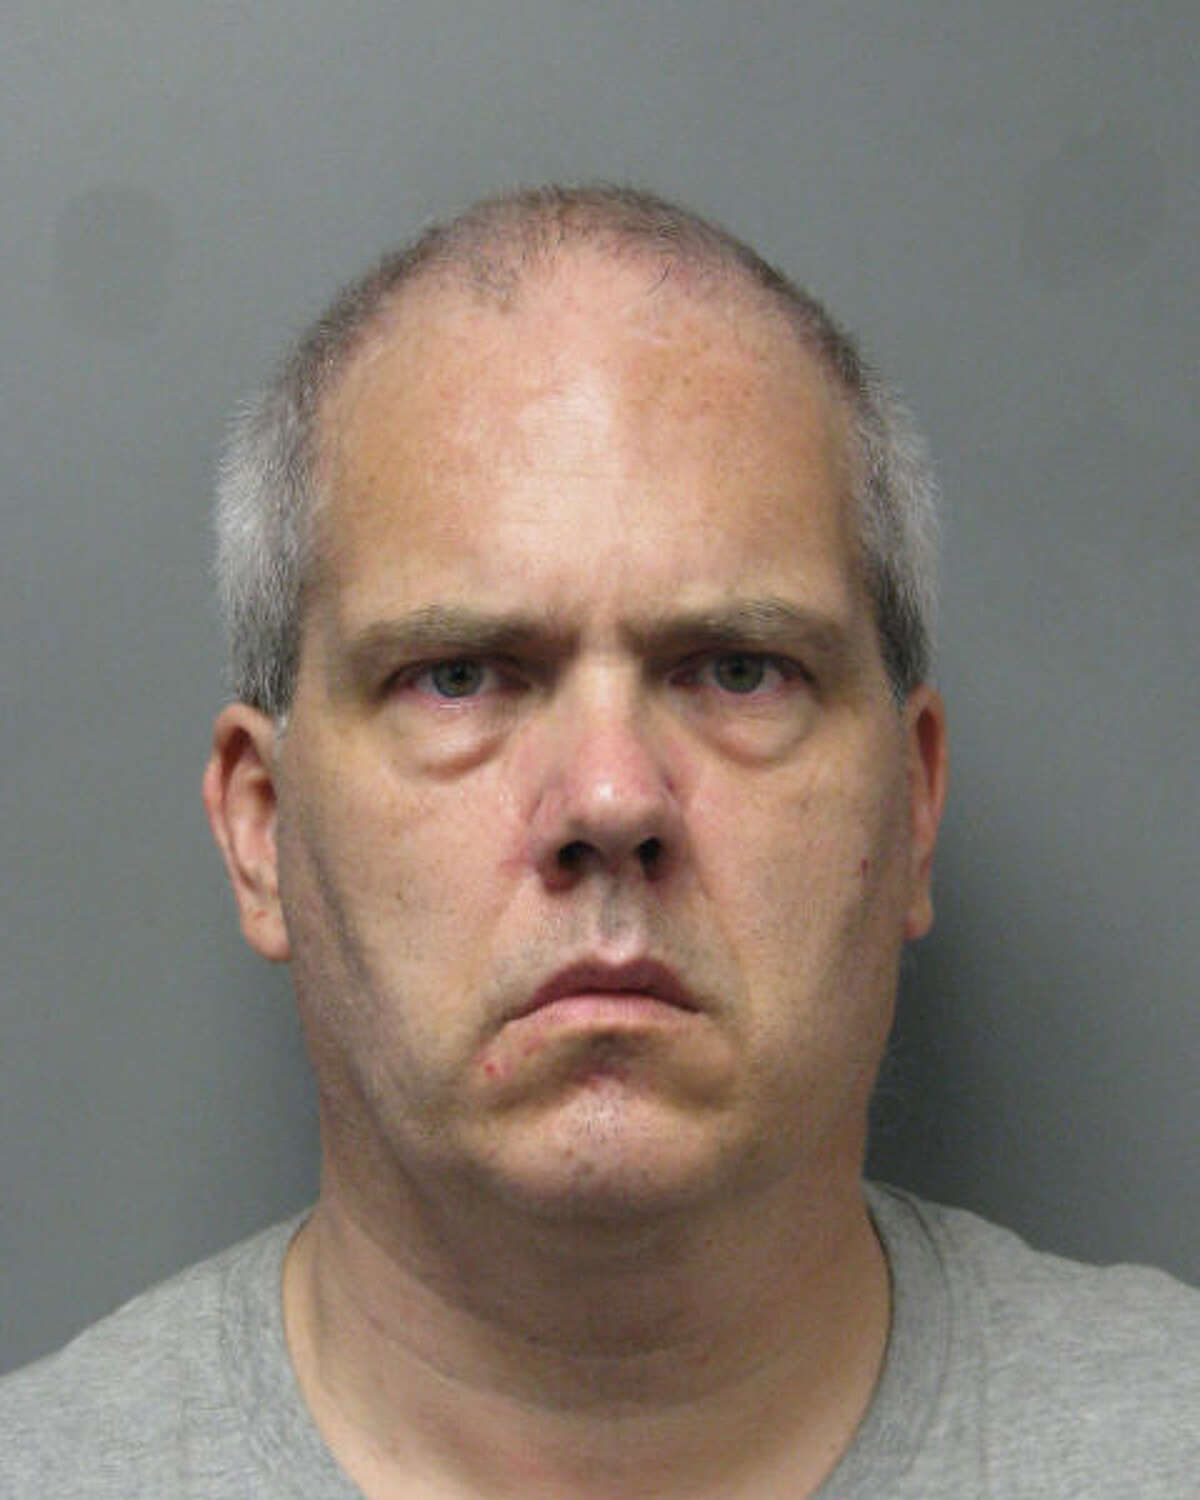 Mug shot of Mark Kelly SUSPECT MARK KELLY DOB 2/5/65 CHARGE AIDING A SUICIDE